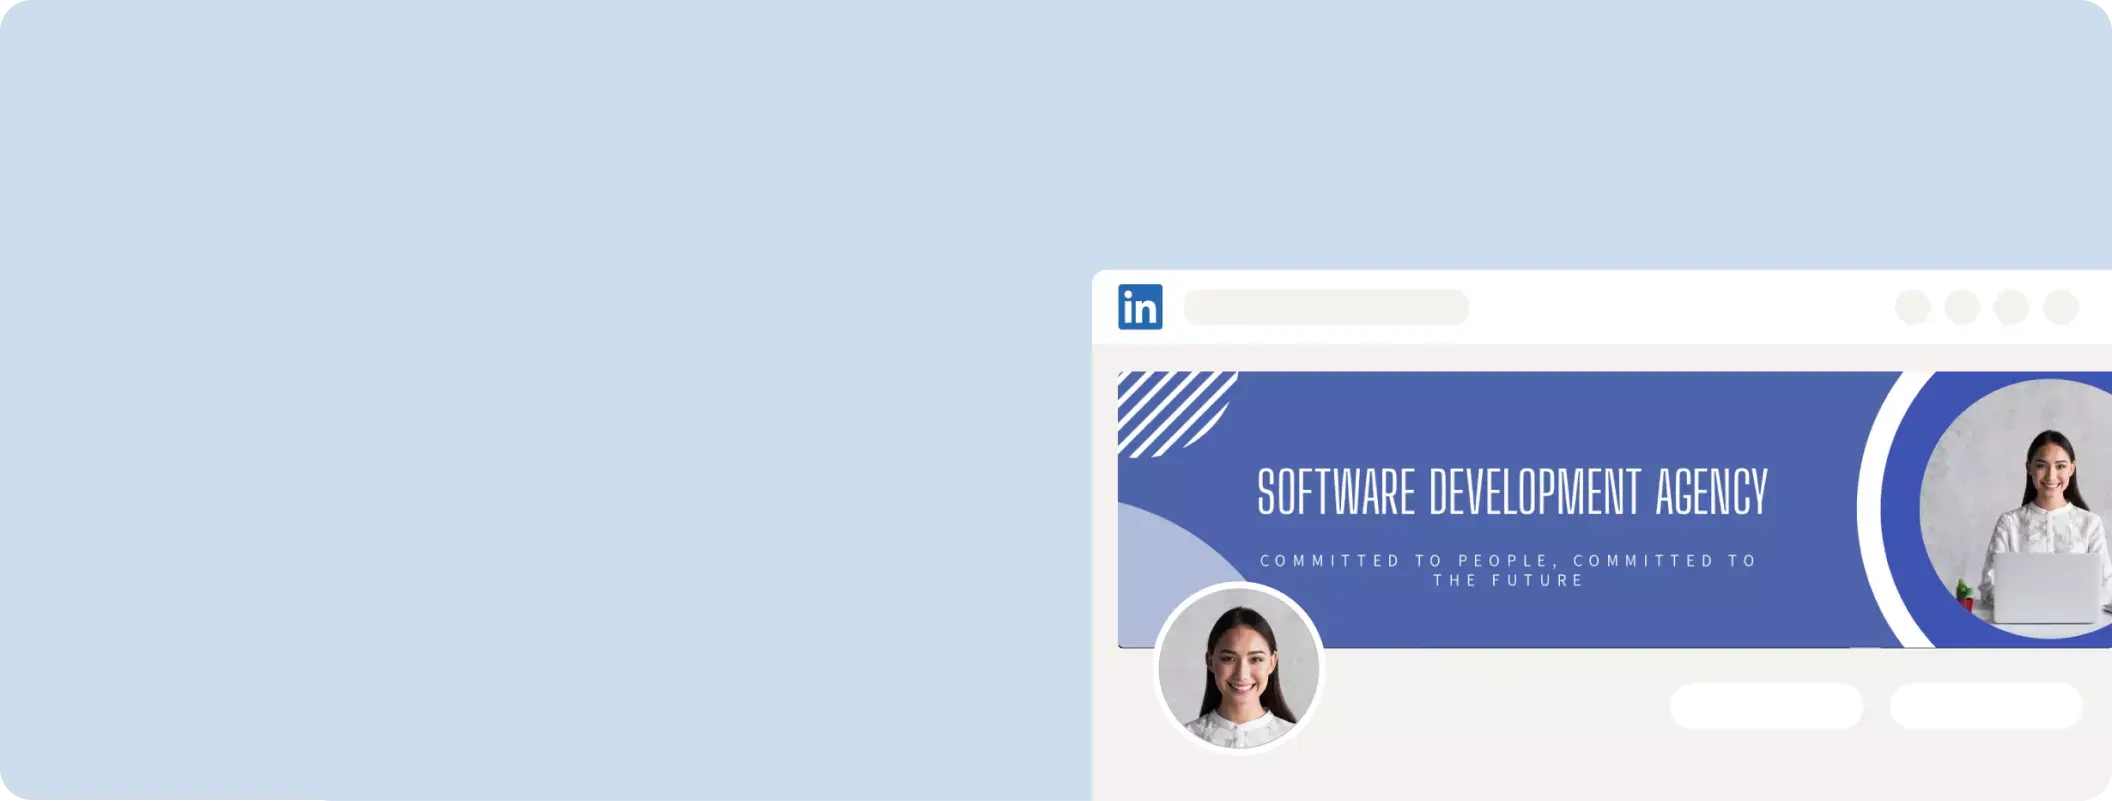 Create stunning LinkedIn banners effortlessly with Designs.ai